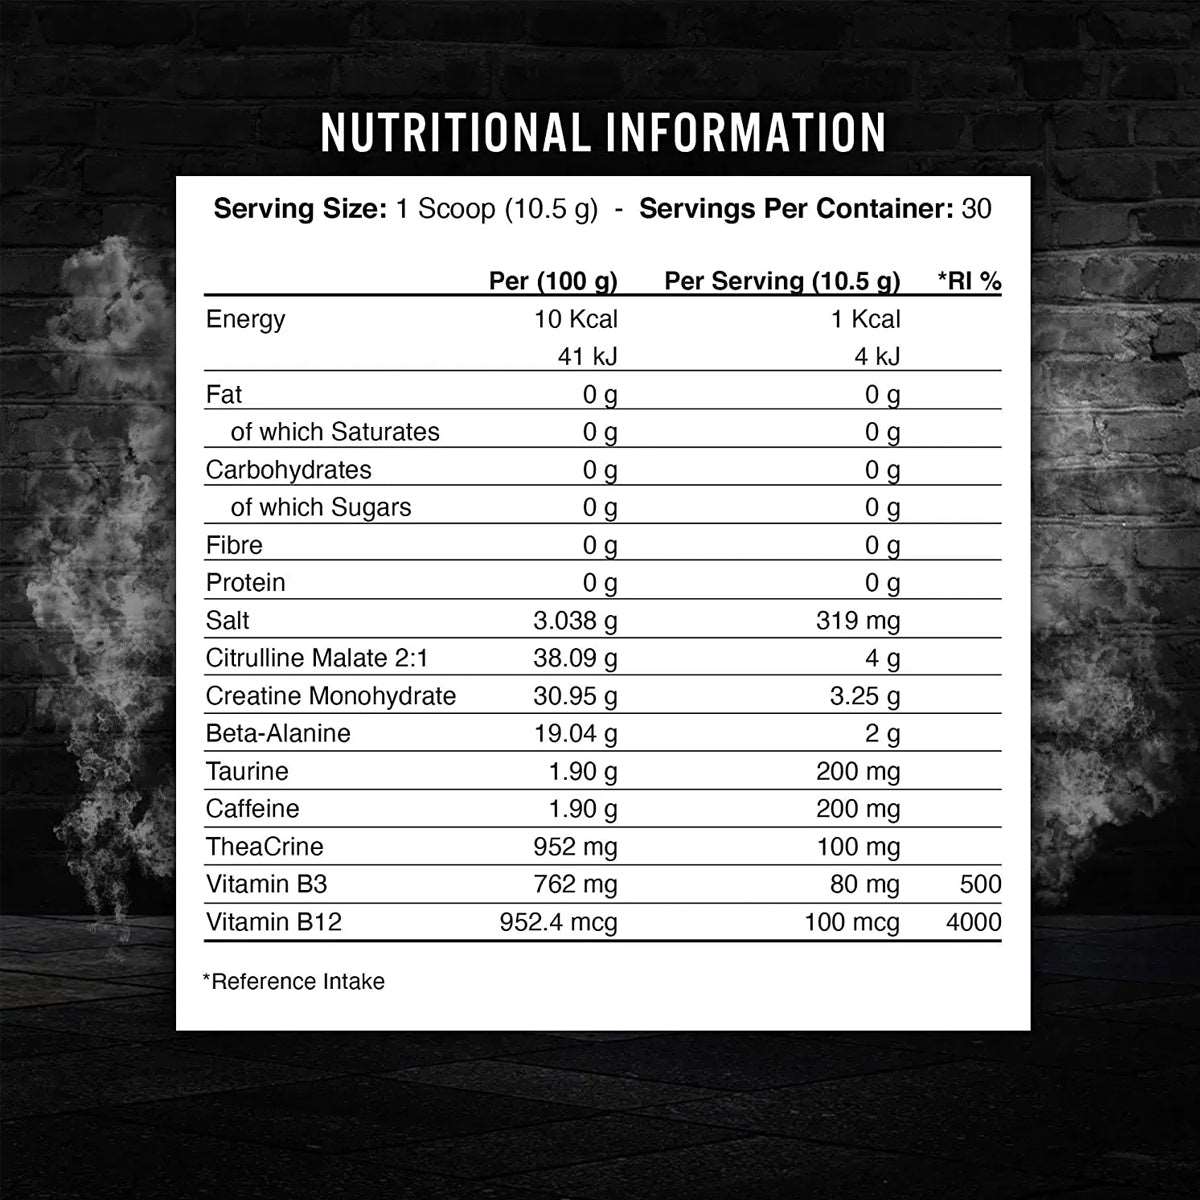 Applied Nutrition Abe 300G